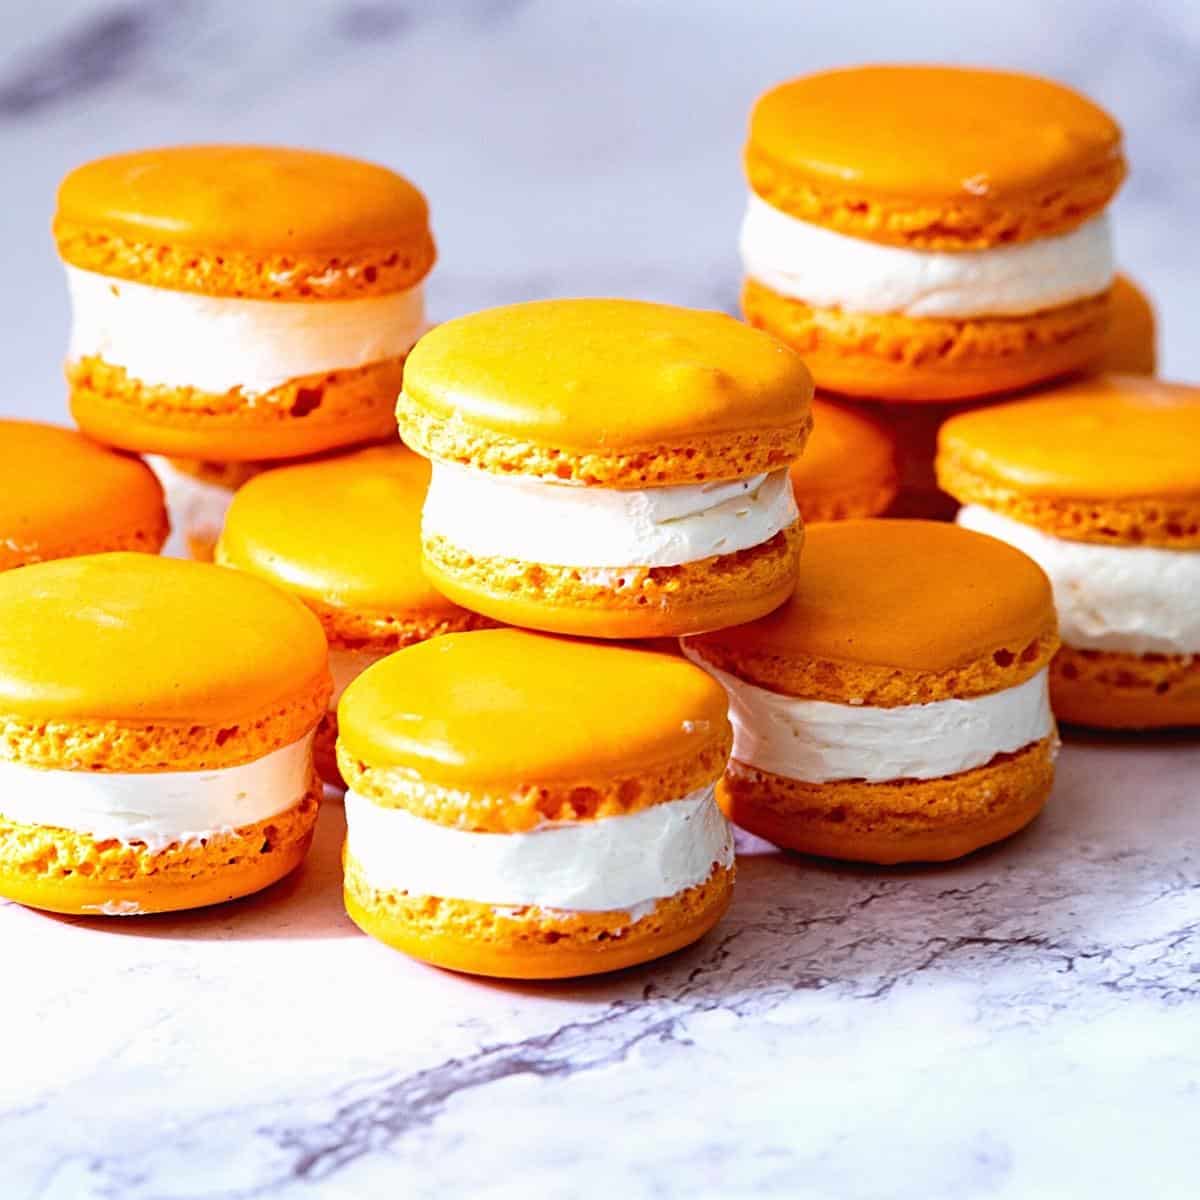 Stack of orange color macarons on the table.